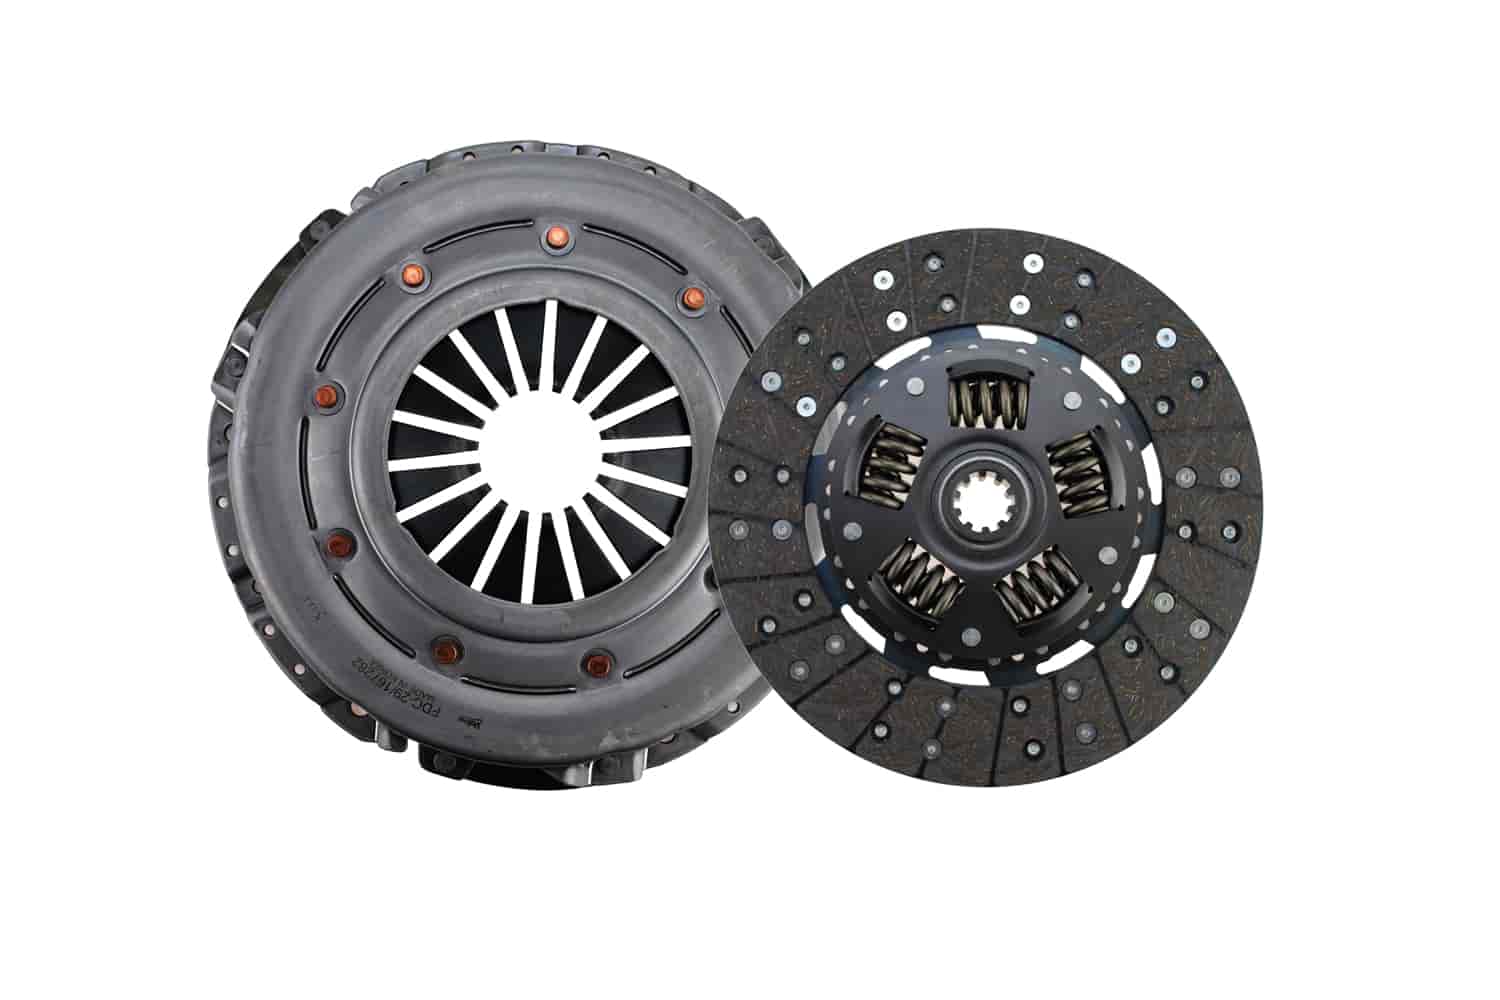 Premium OEM Replacement Clutch Kit 1986-2000 Ford Mustang 4.6L/5.0L (6-Bolt Flywheel)